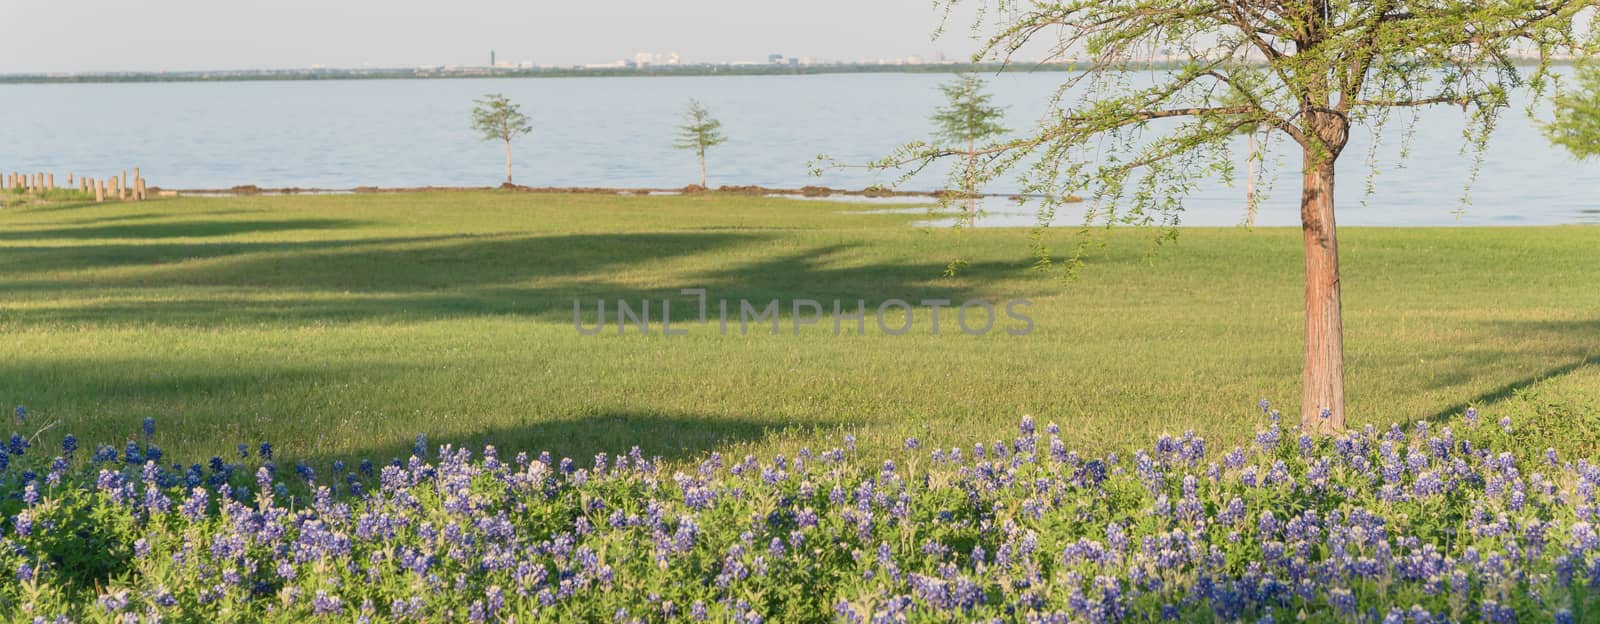 Panorama view Bluebonnet blossom near lake park in Lewisville, Texas, USA. Beautiful Texas state flower blooming with soft sunset light, row of big trees in background